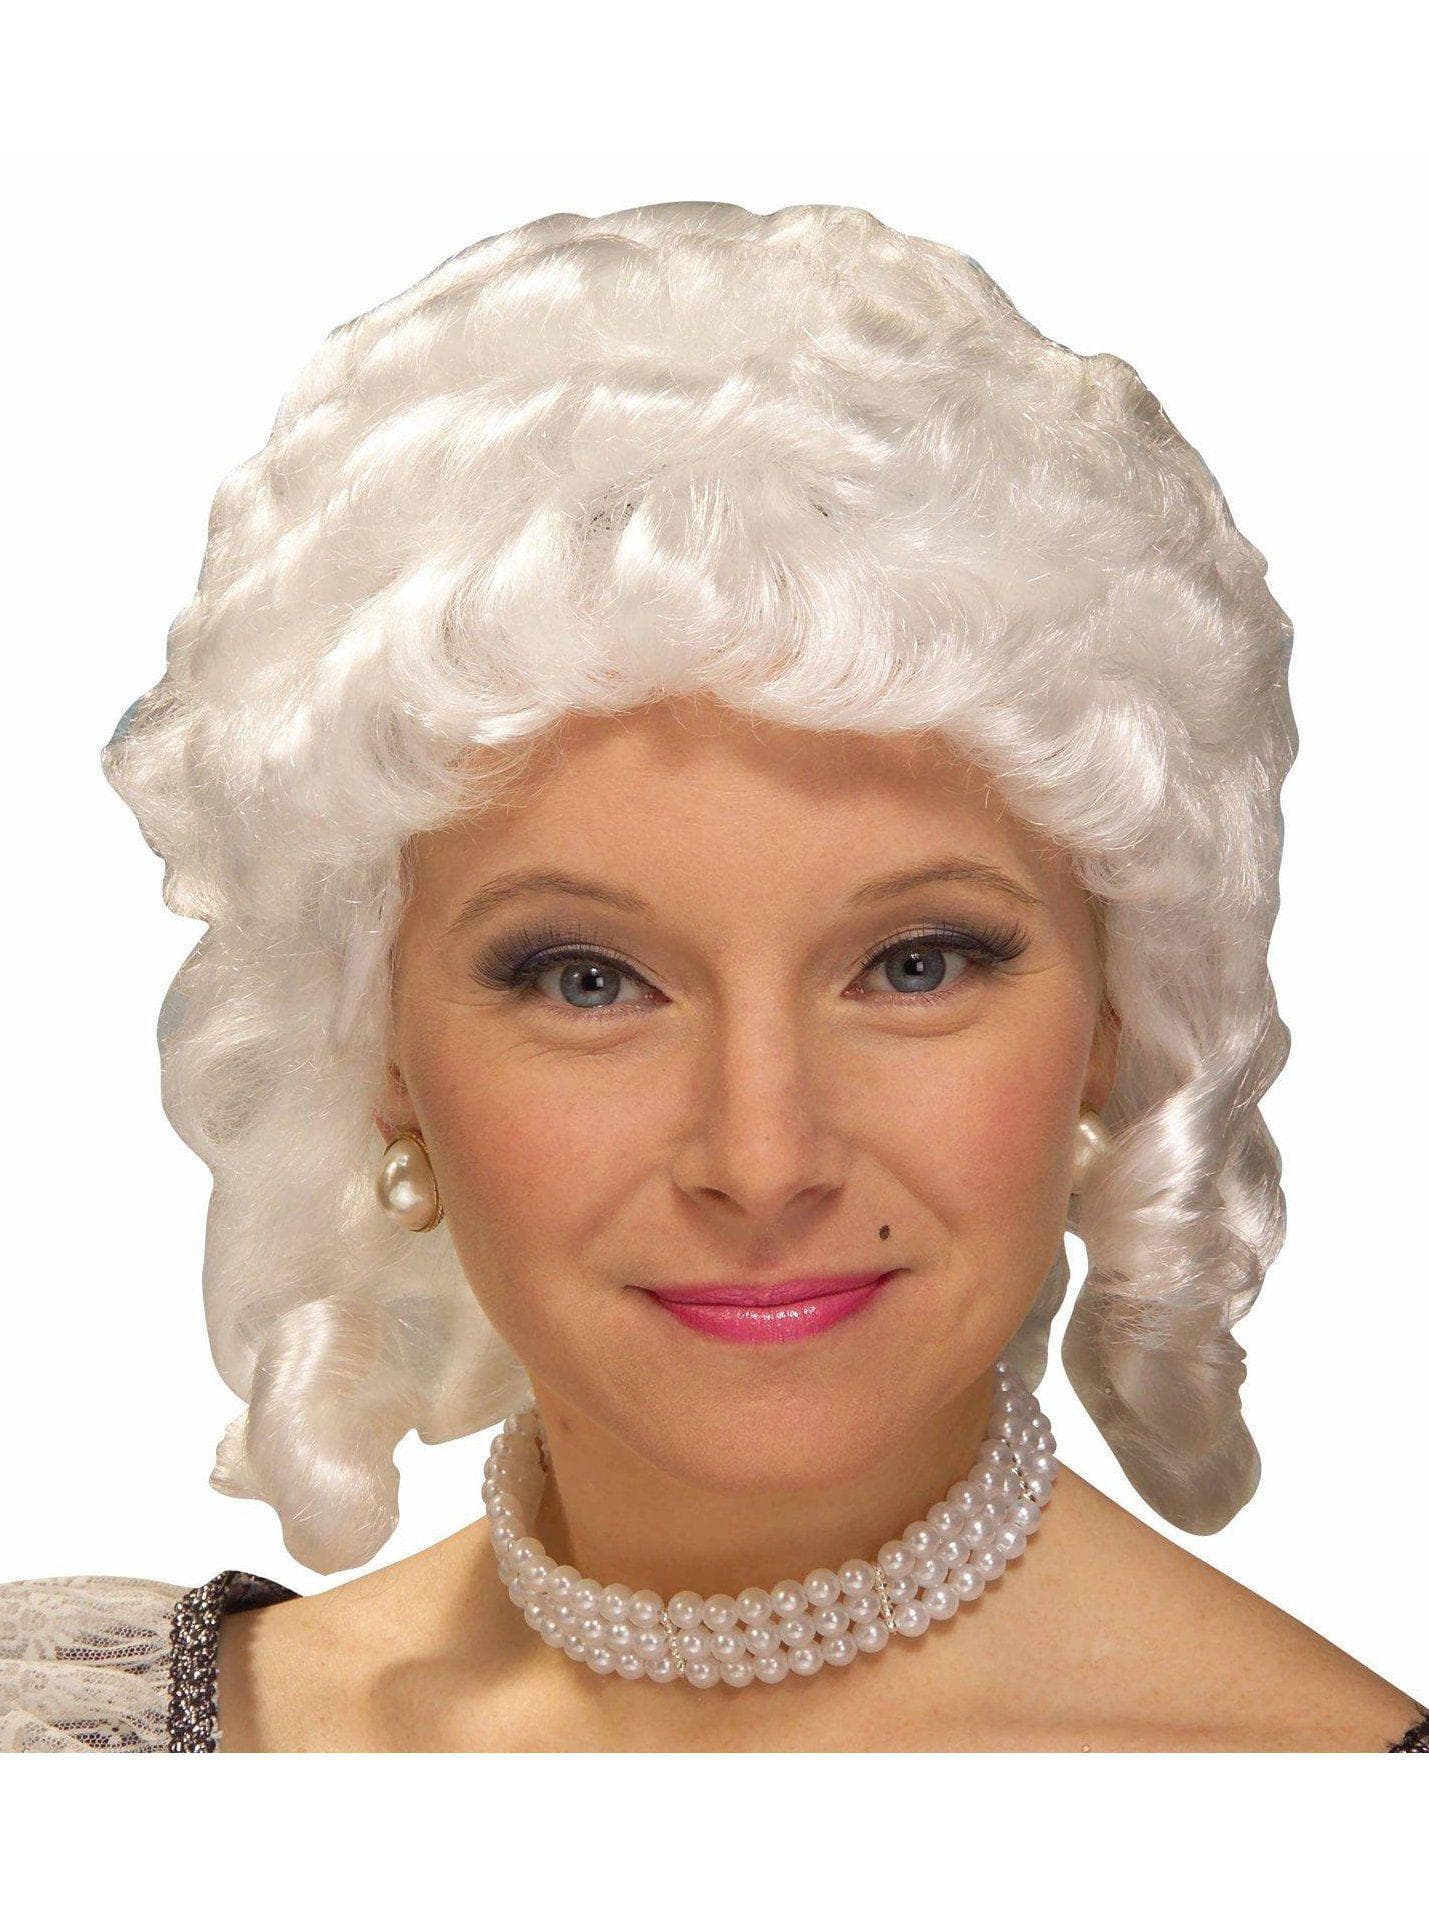 Women's White Colonial Wig - costumes.com